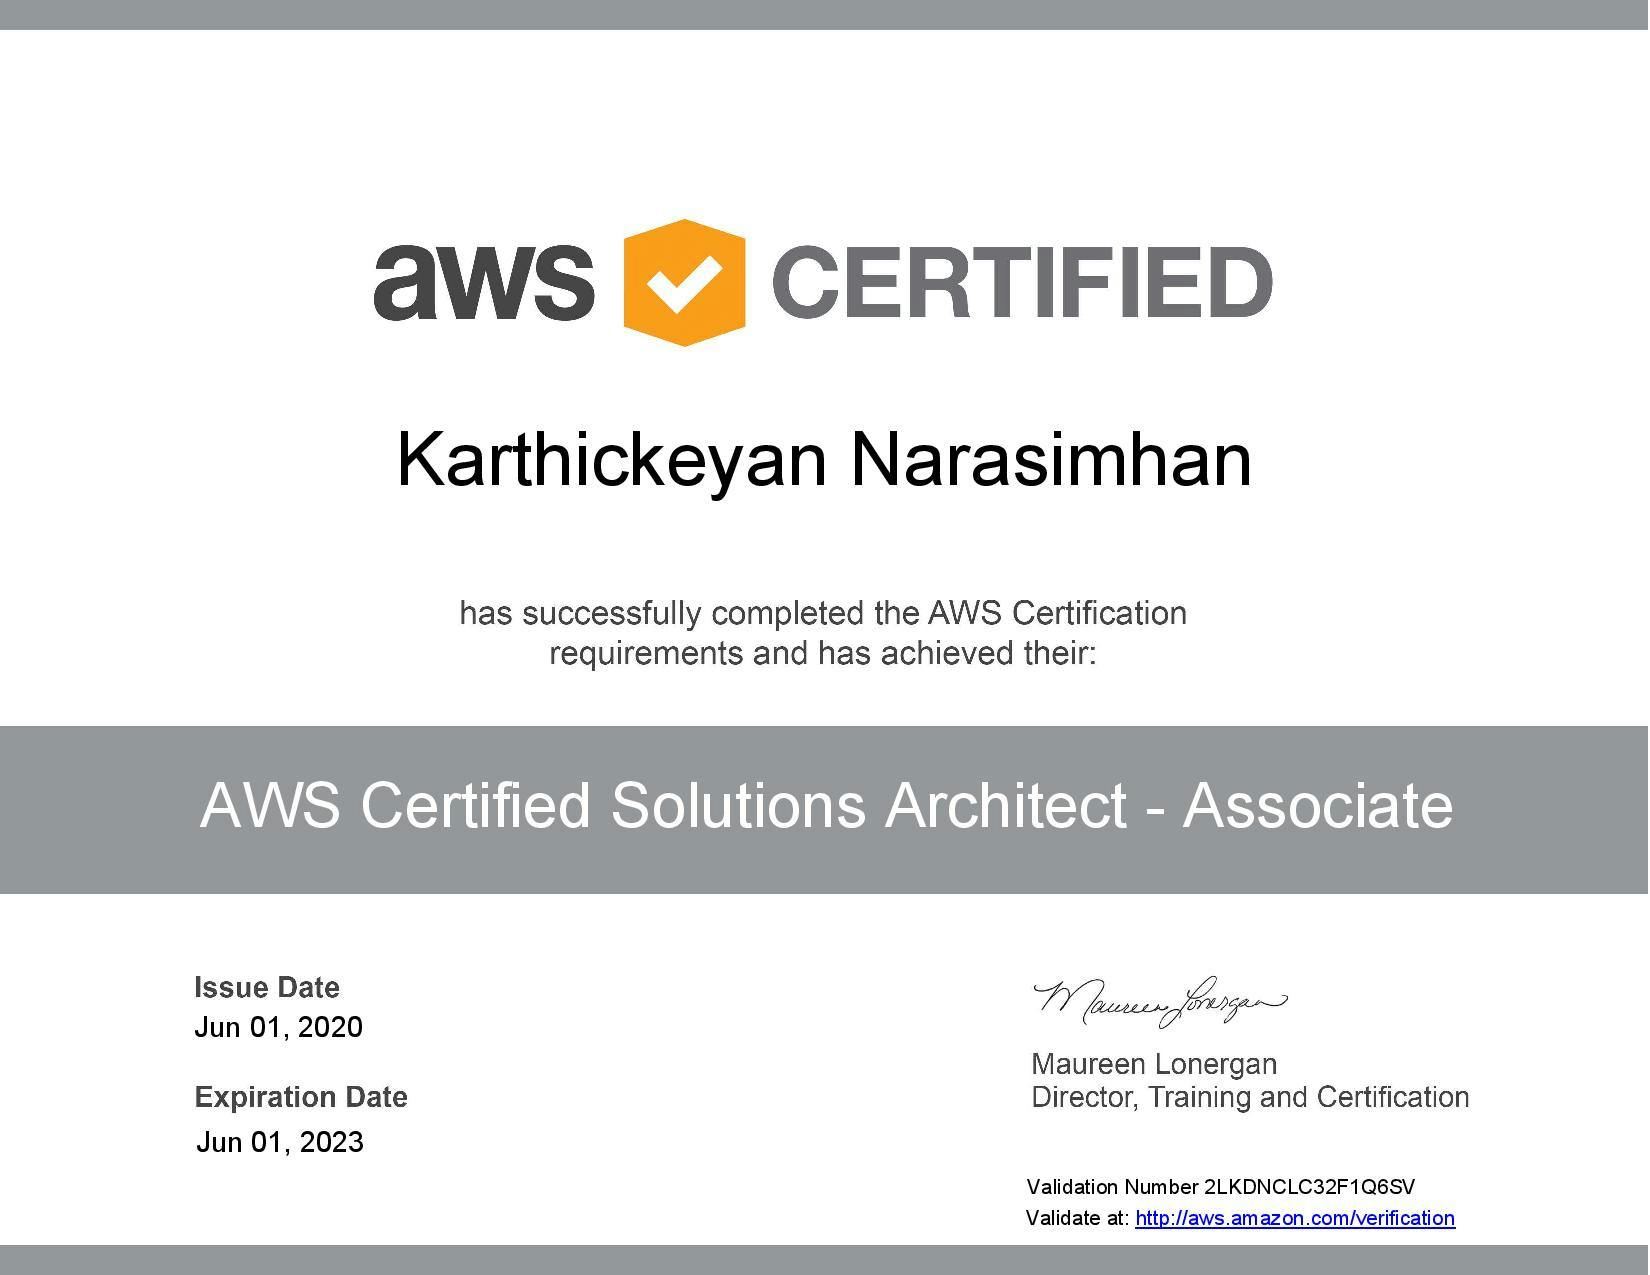 AWS Certified Solutions Architect - Associate certificate-page-001.jpg